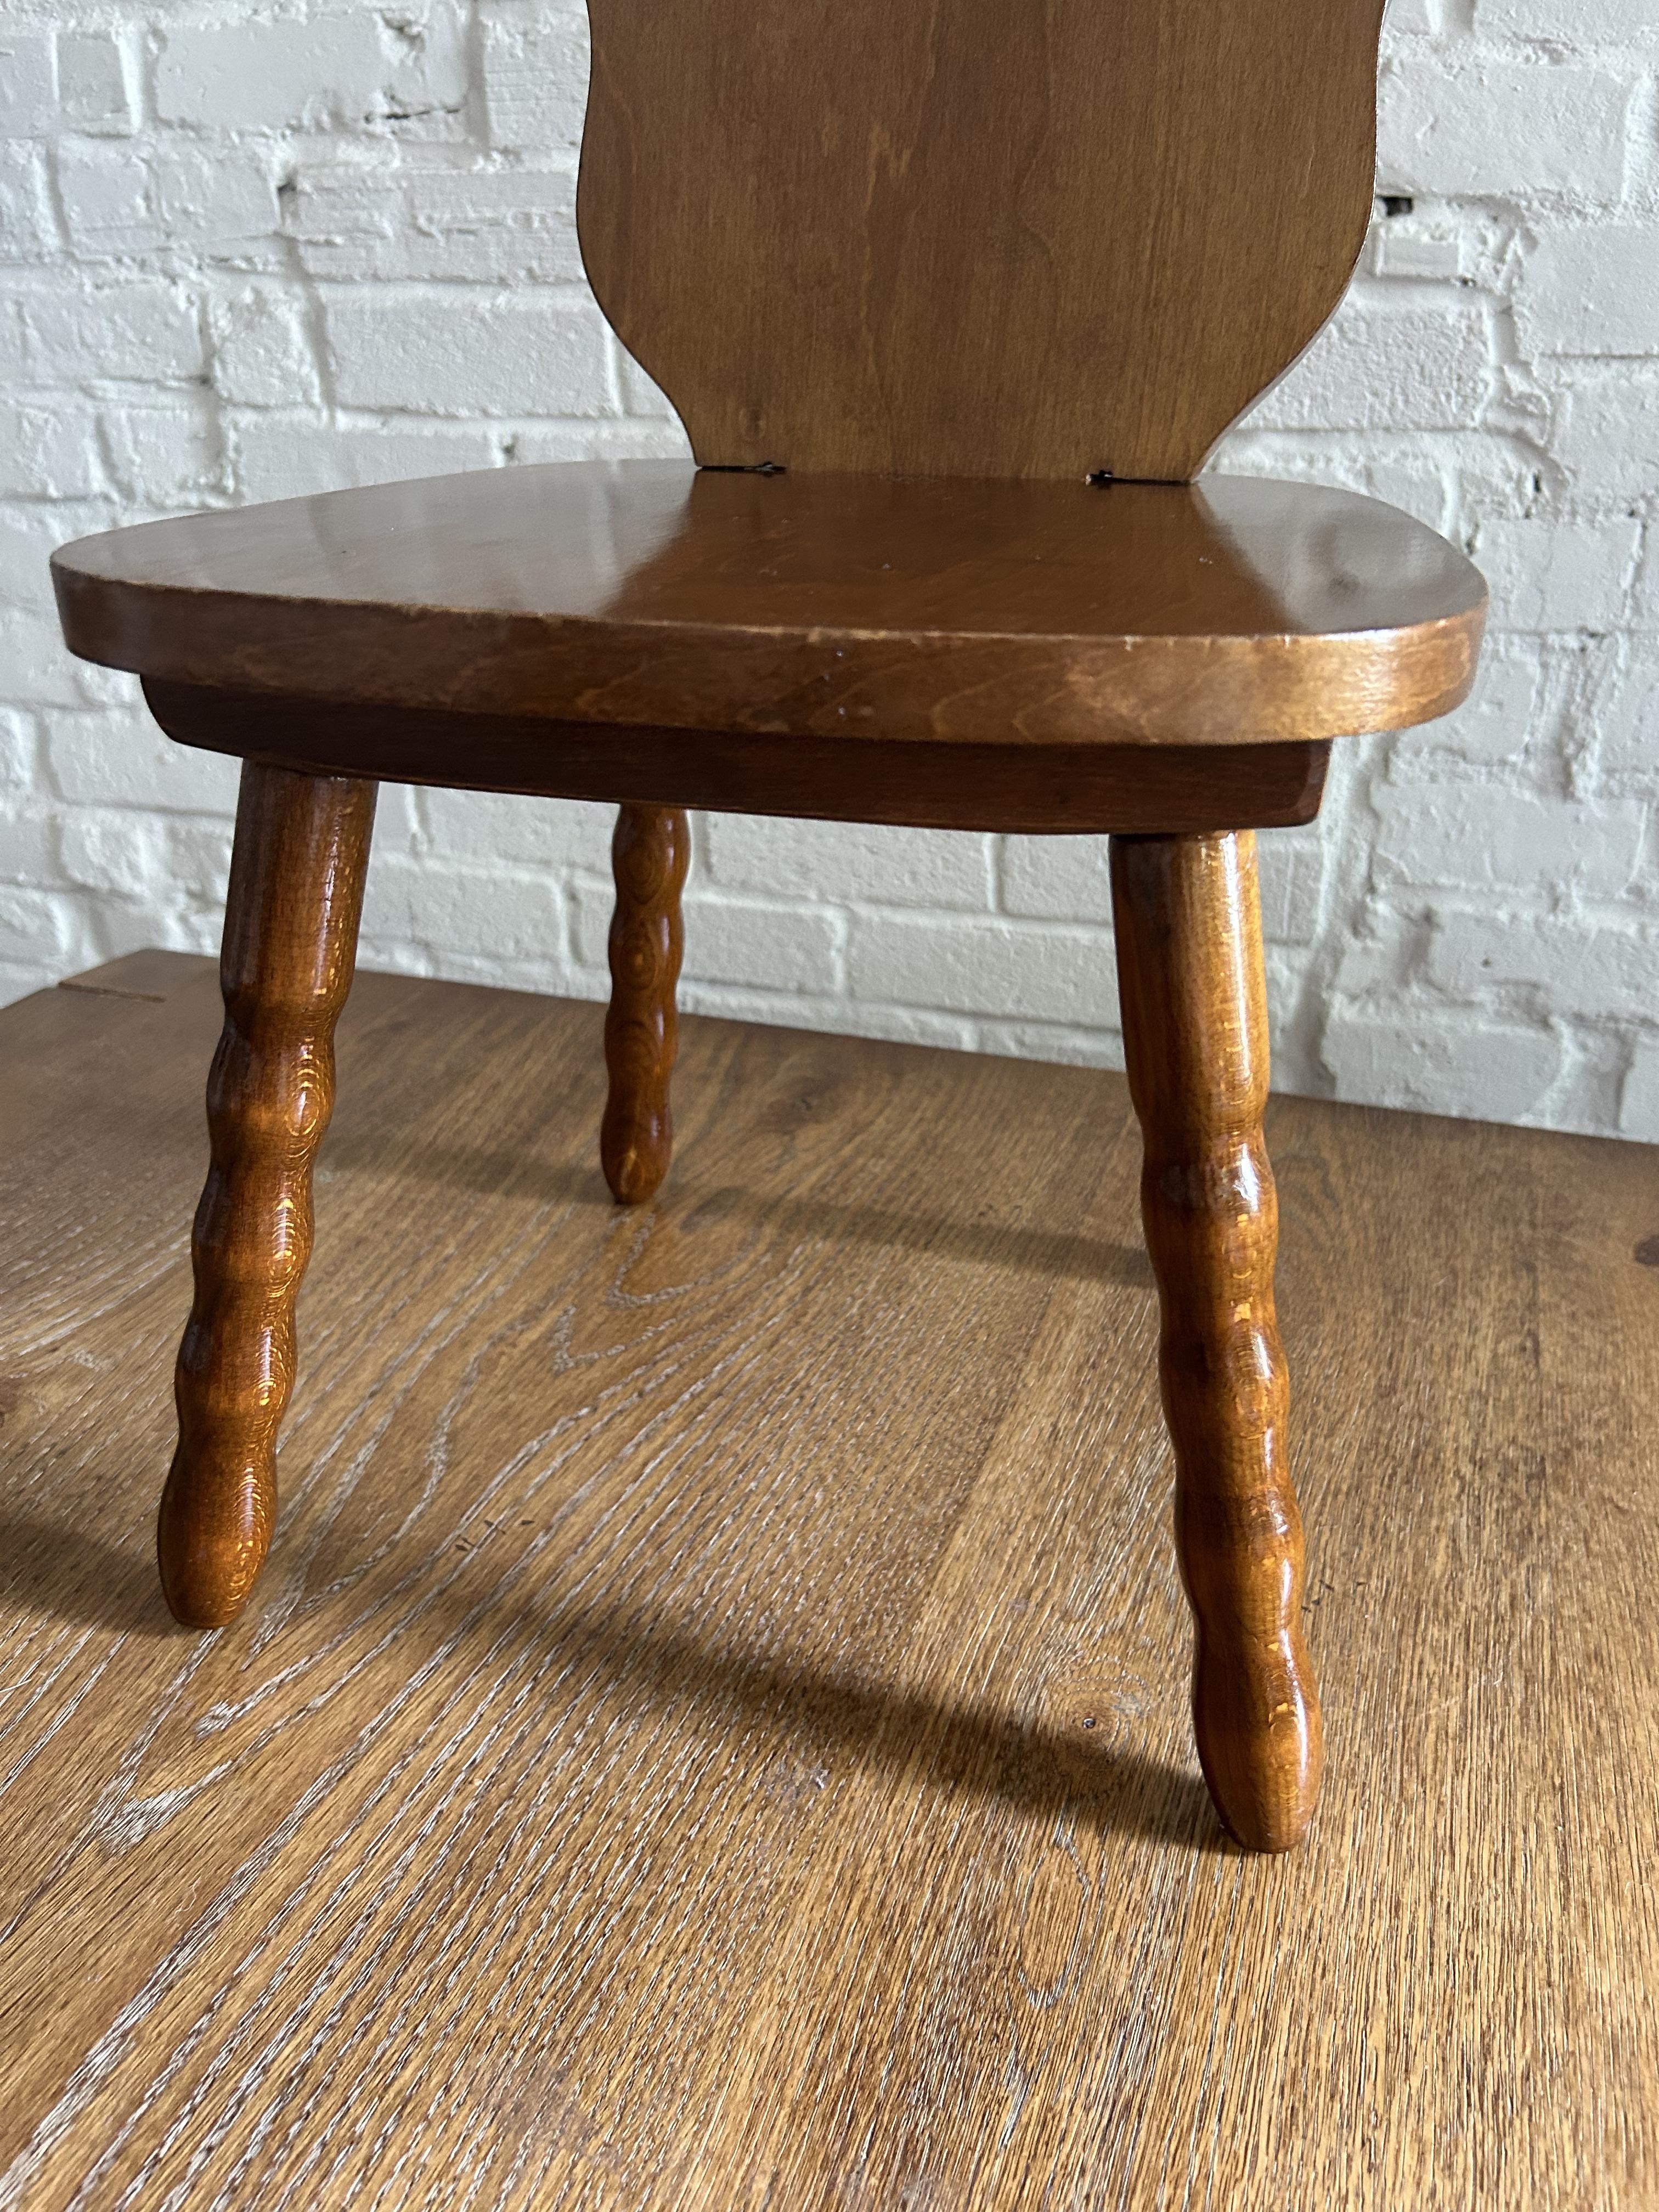 Set of 3 1960s Solid Wood Decorative Stools / Children's Chair, Made in Romania 10